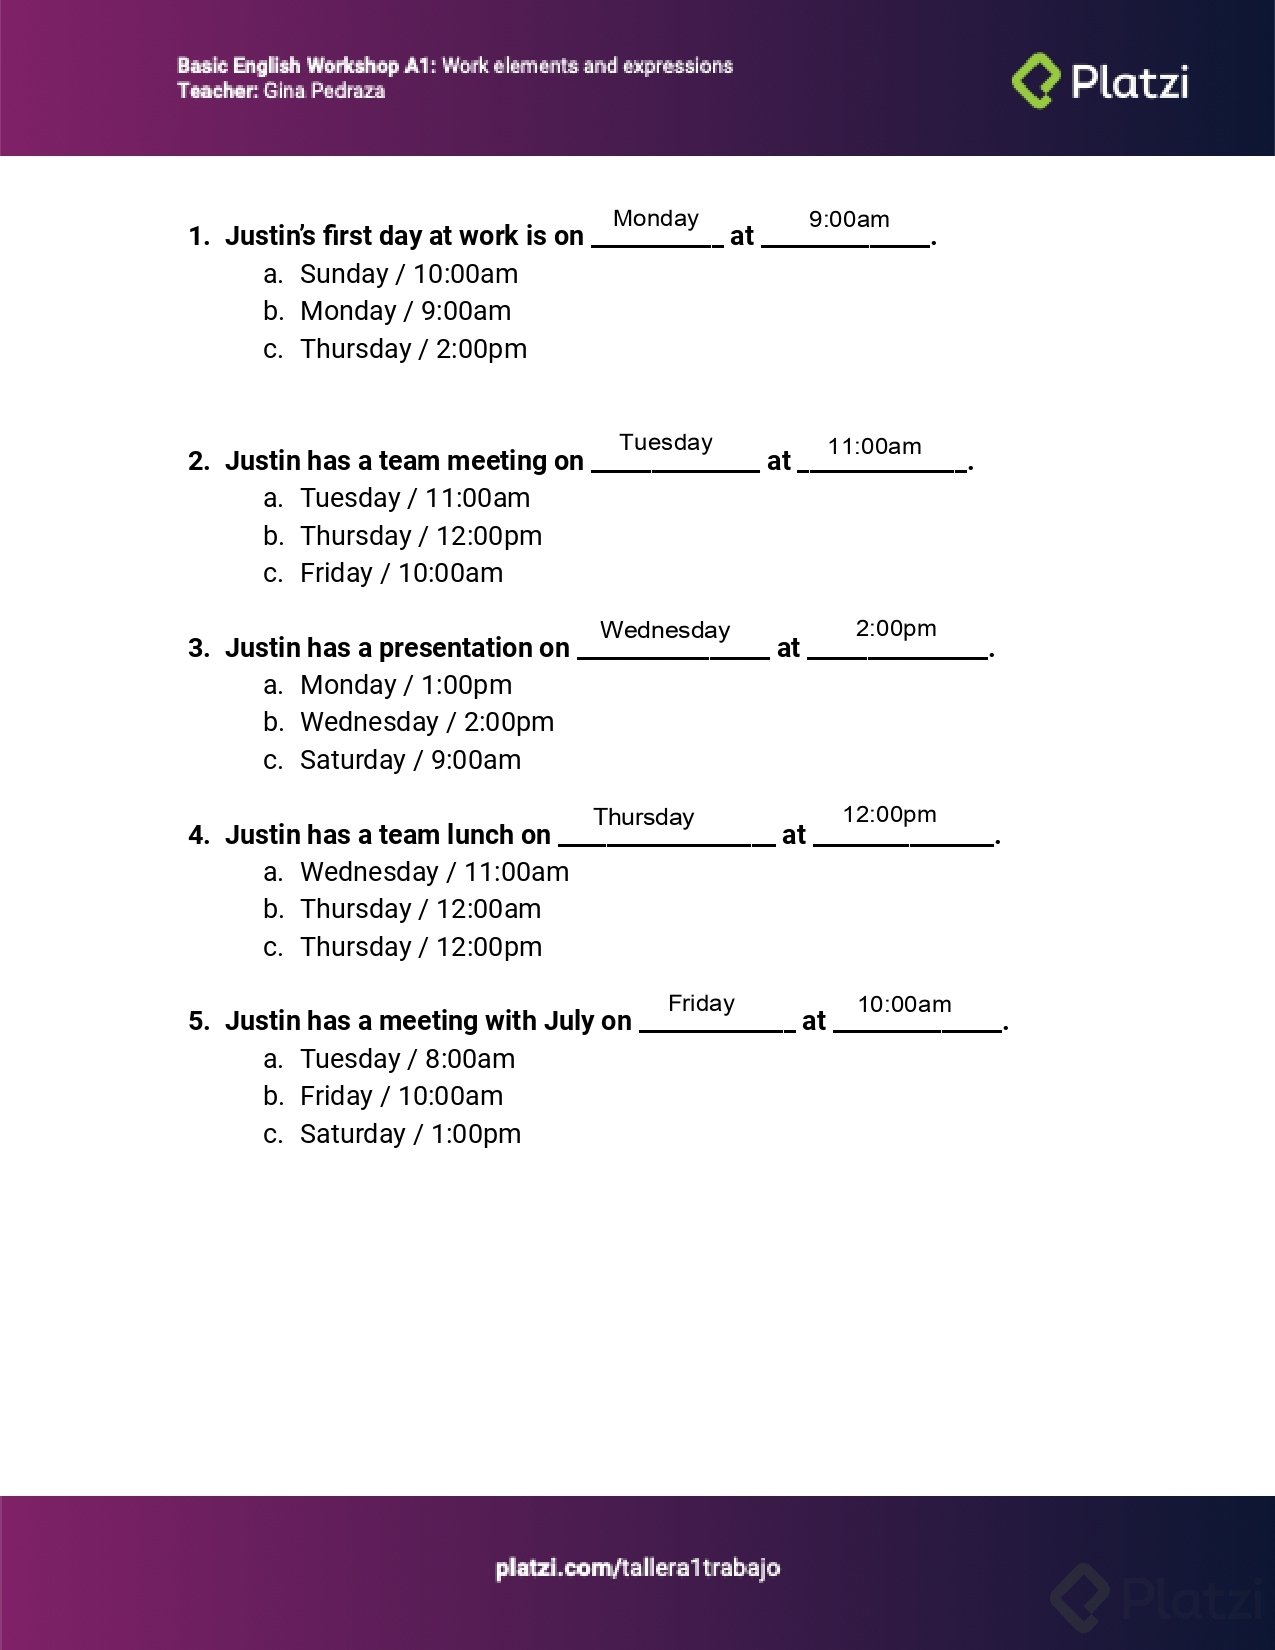 worksheet-class-5-preparing-for-your-first-day-at-work_38c517a0-ff74-4034-bf38-f1e9a39f3bd7_page-0002.jpg